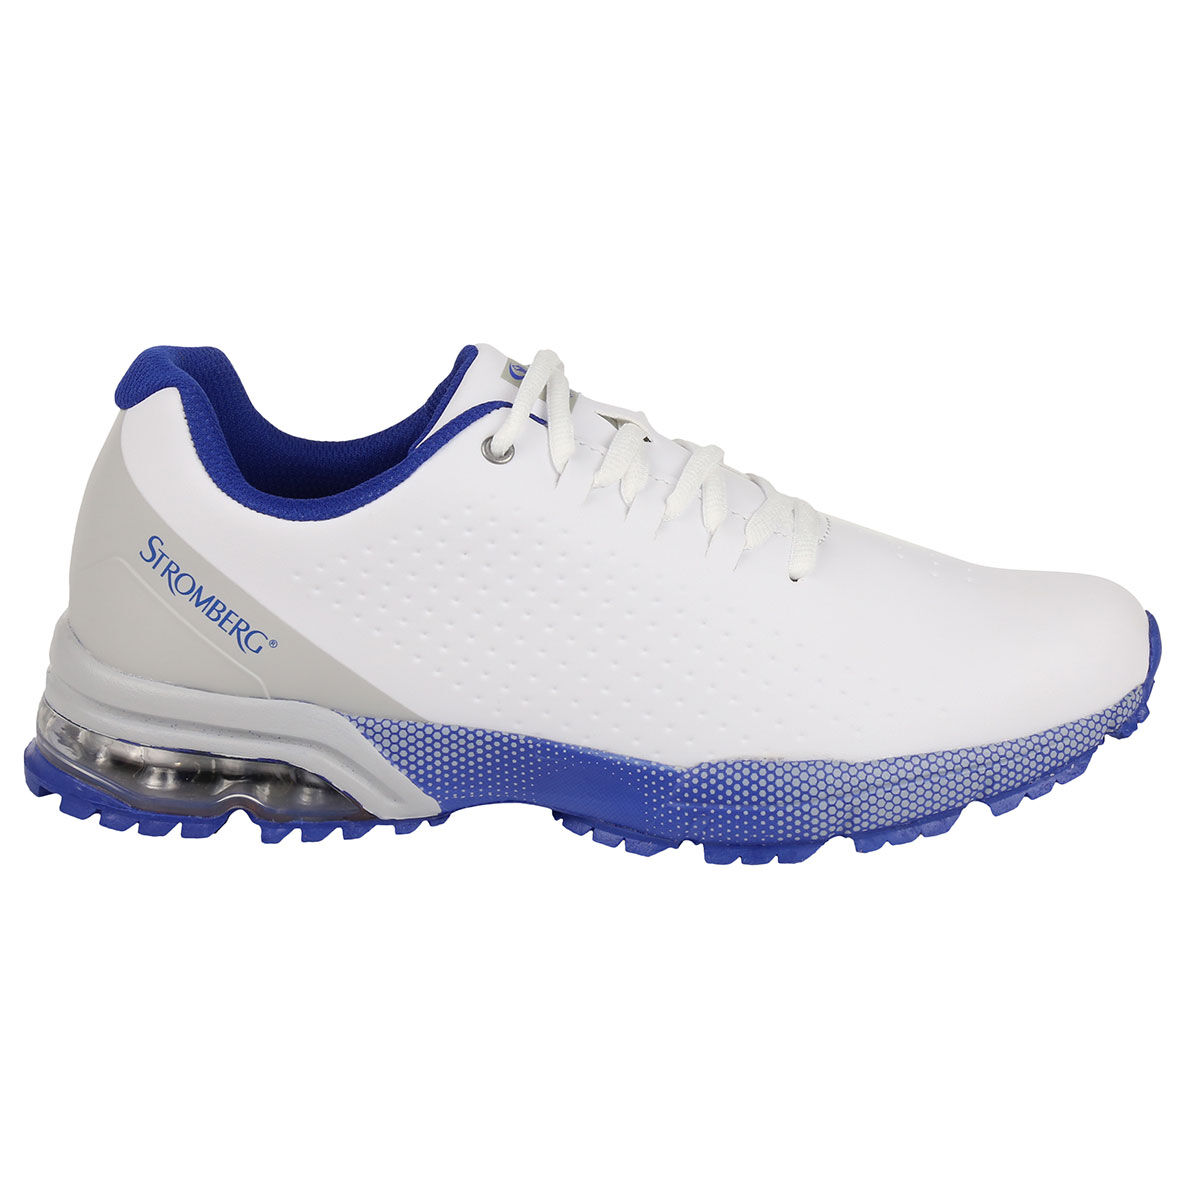 Stromberg White and Blue Waterproof Ailsa Spikeless Golf Shoes, Size: 9 | American Golf